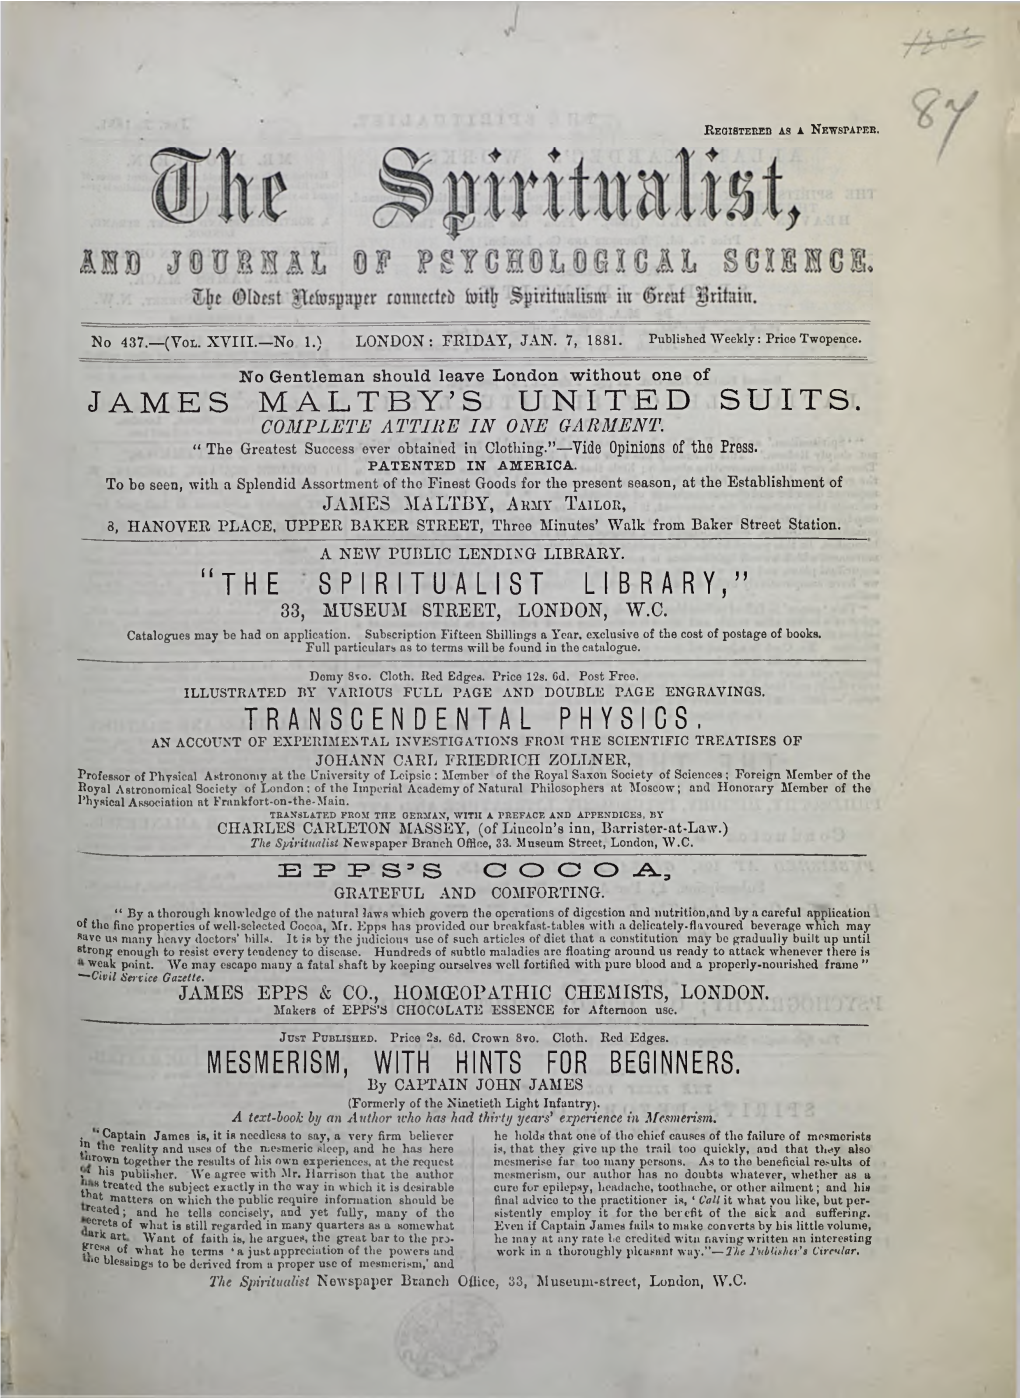 Mesmerism, with Hints for Beginners